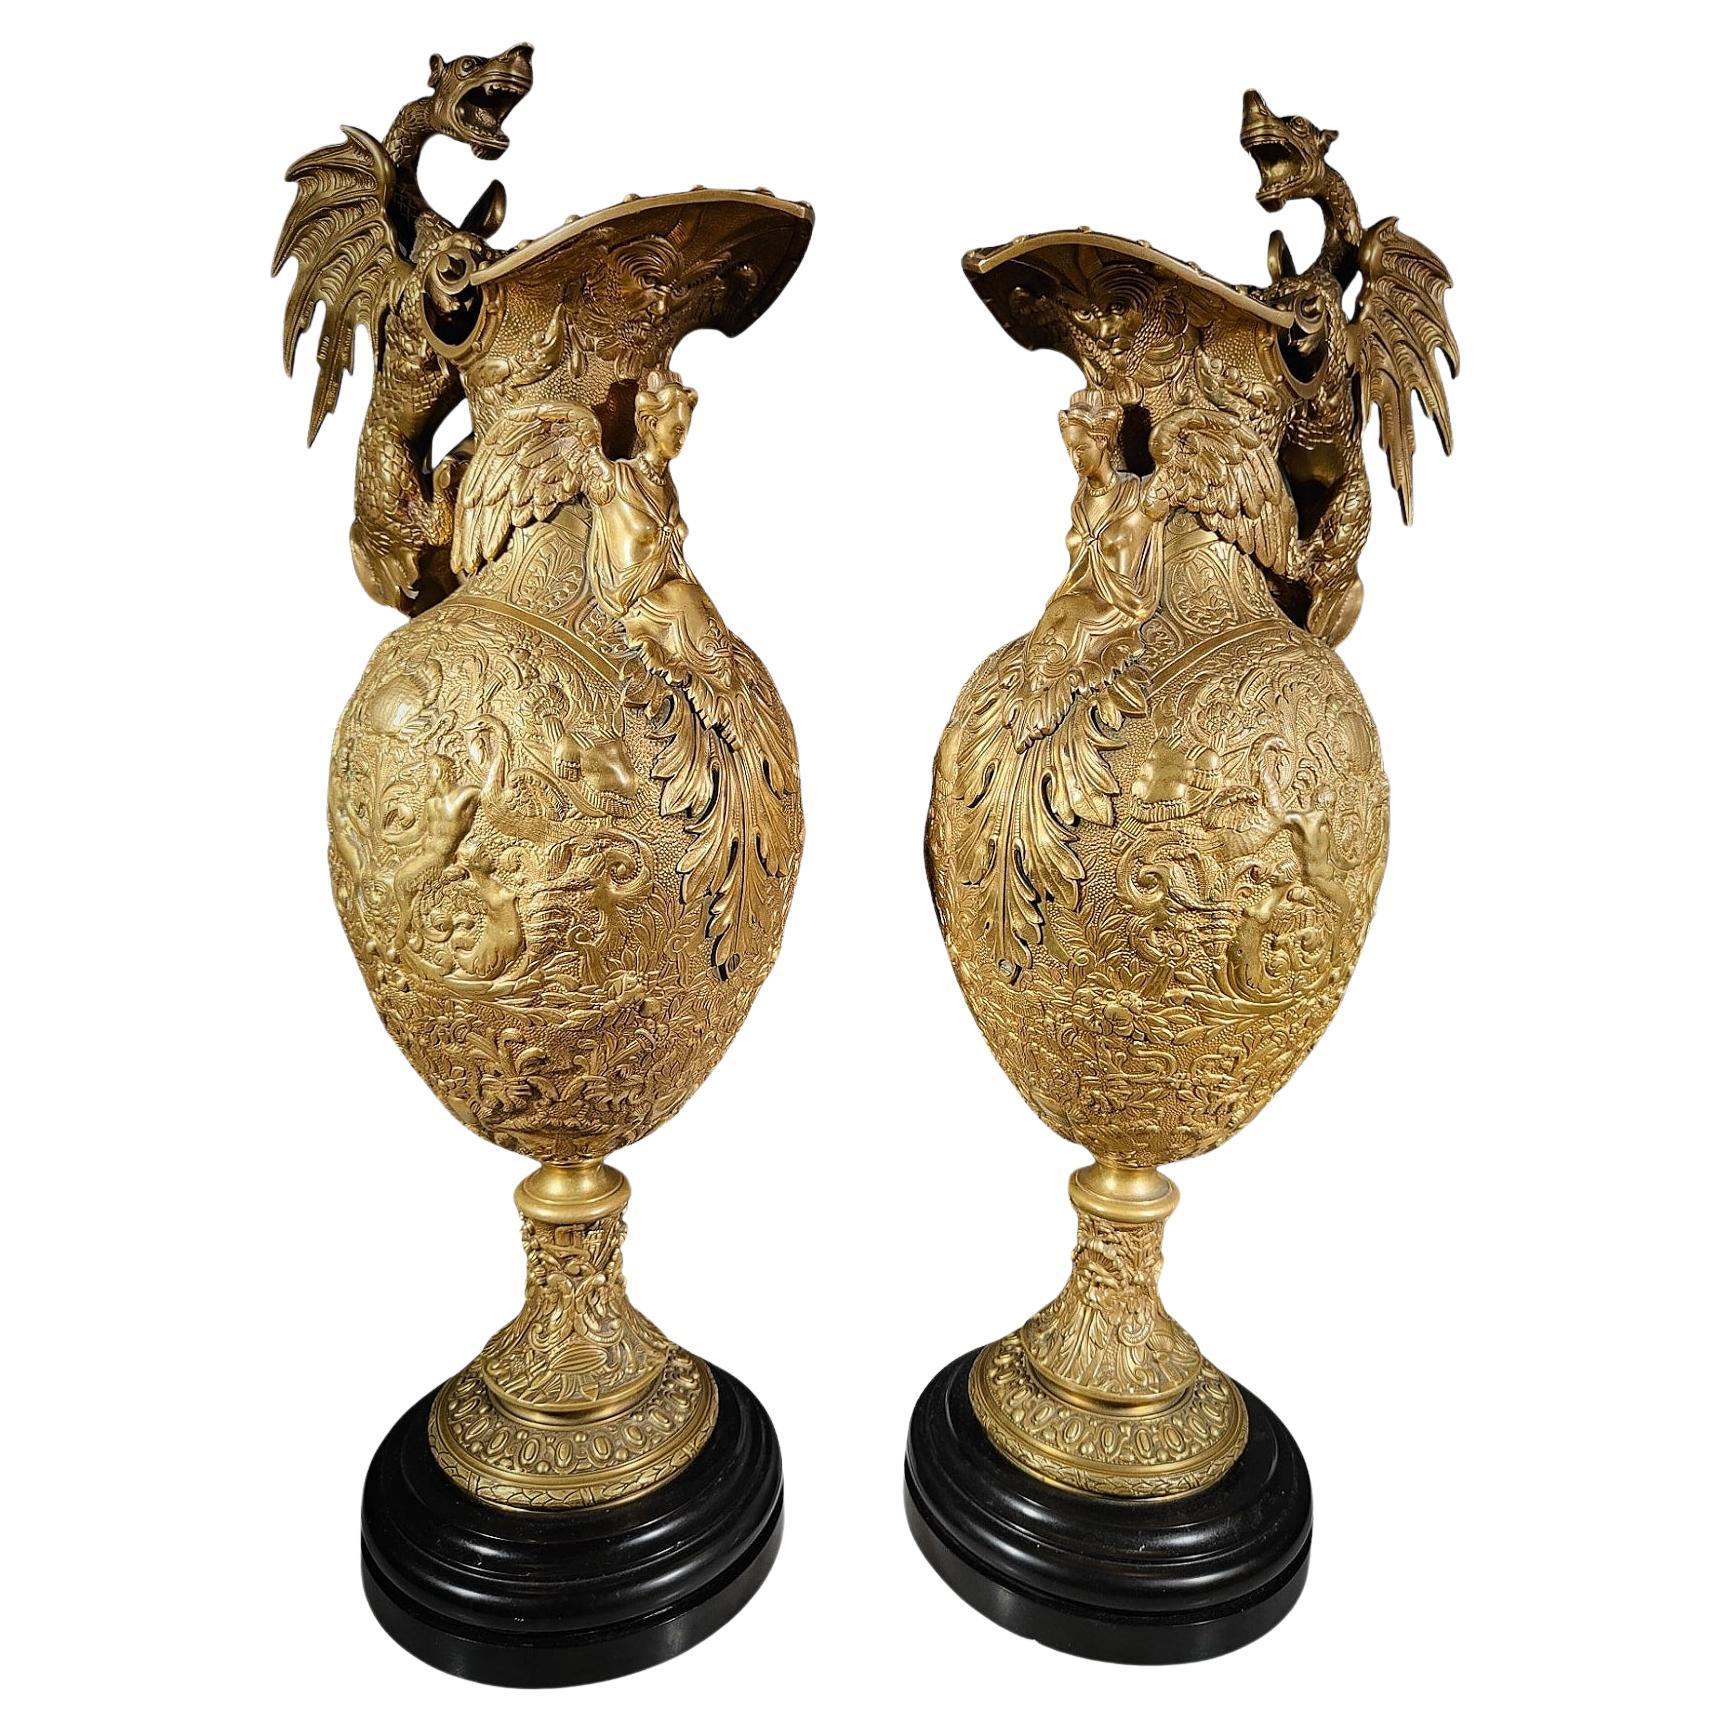 Magnificent Gilded Bronze Vases from the 19th Century